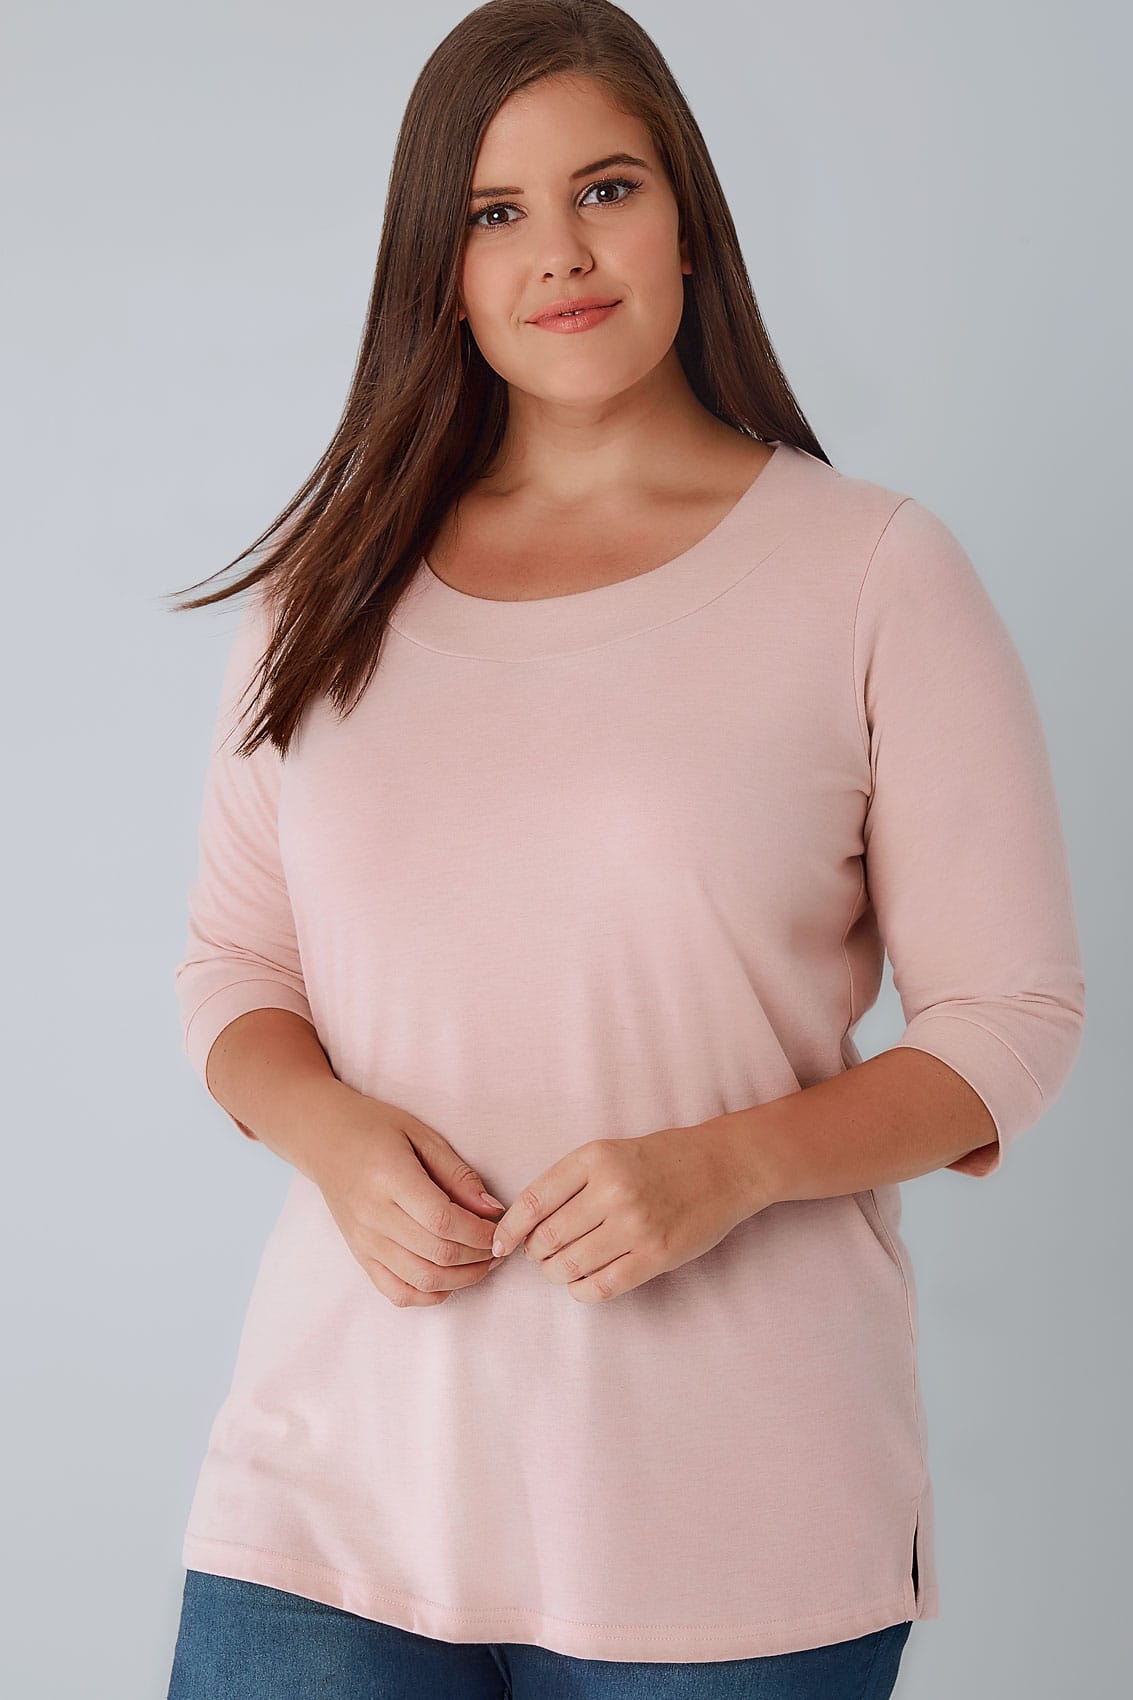 Light Pink Band Scoop Neckline T-Shirt With 3/4 Sleeves, Plus size 16 to 36